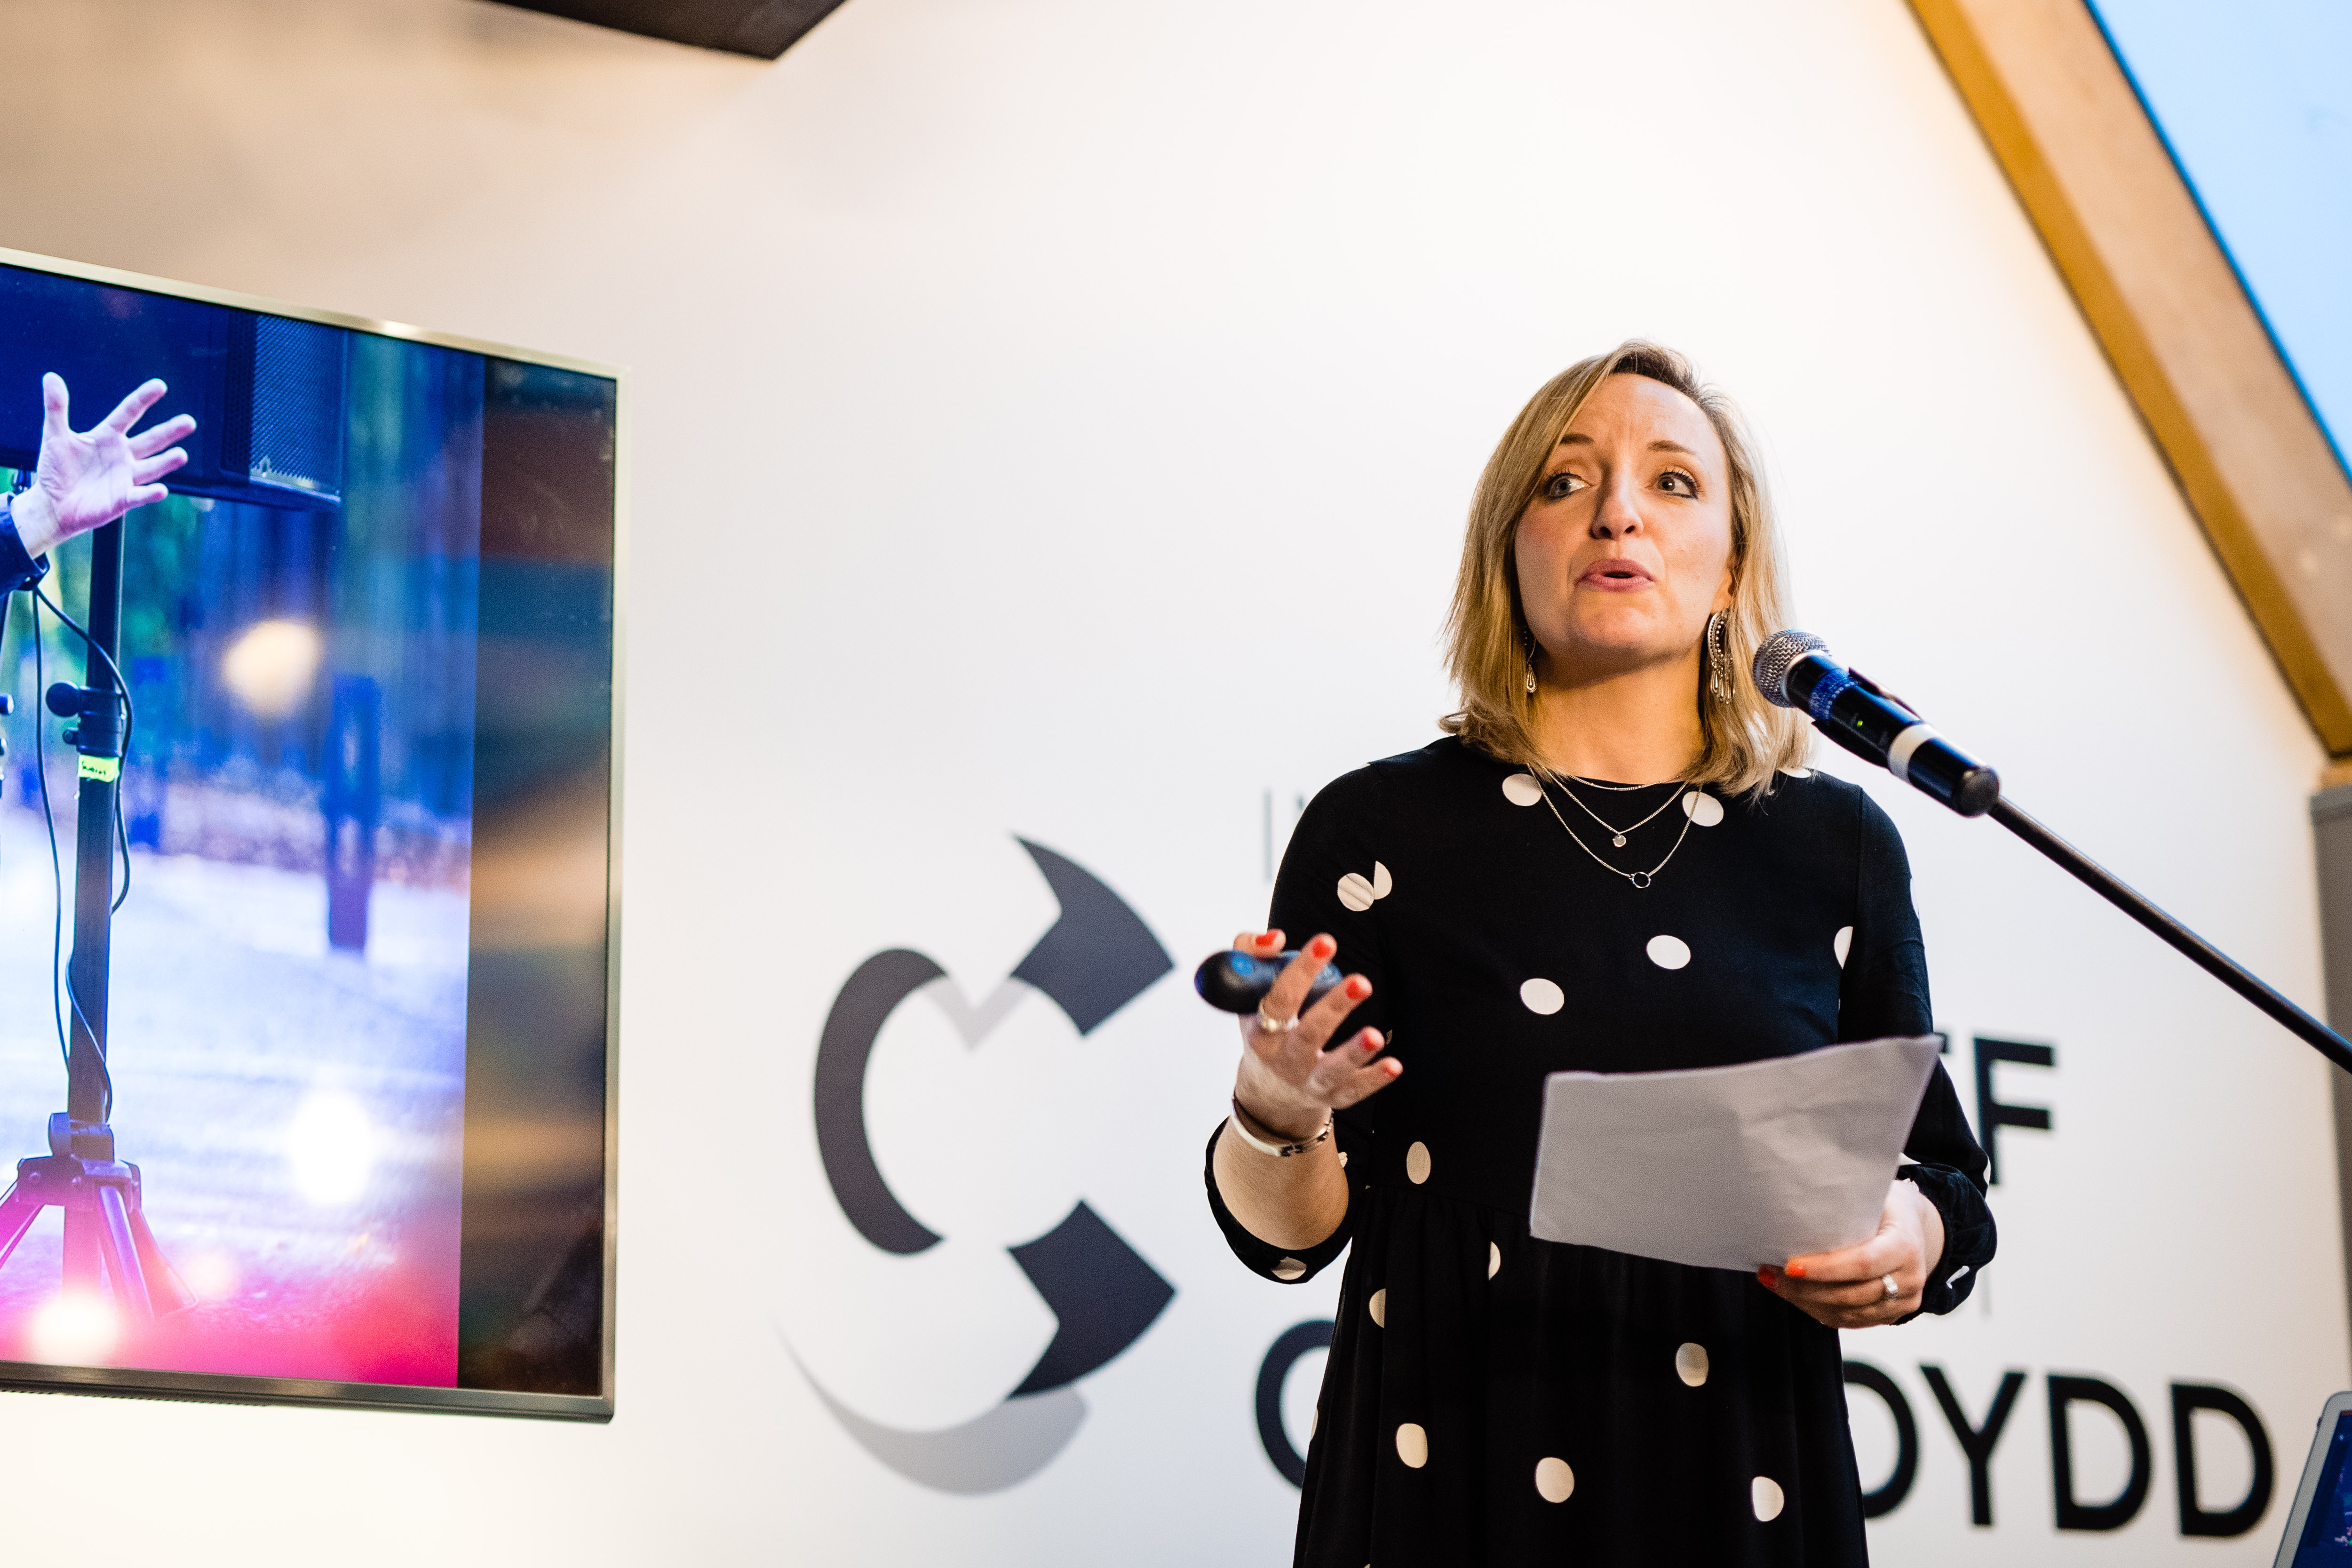 Vicki presenting at a Creative Cardiff event